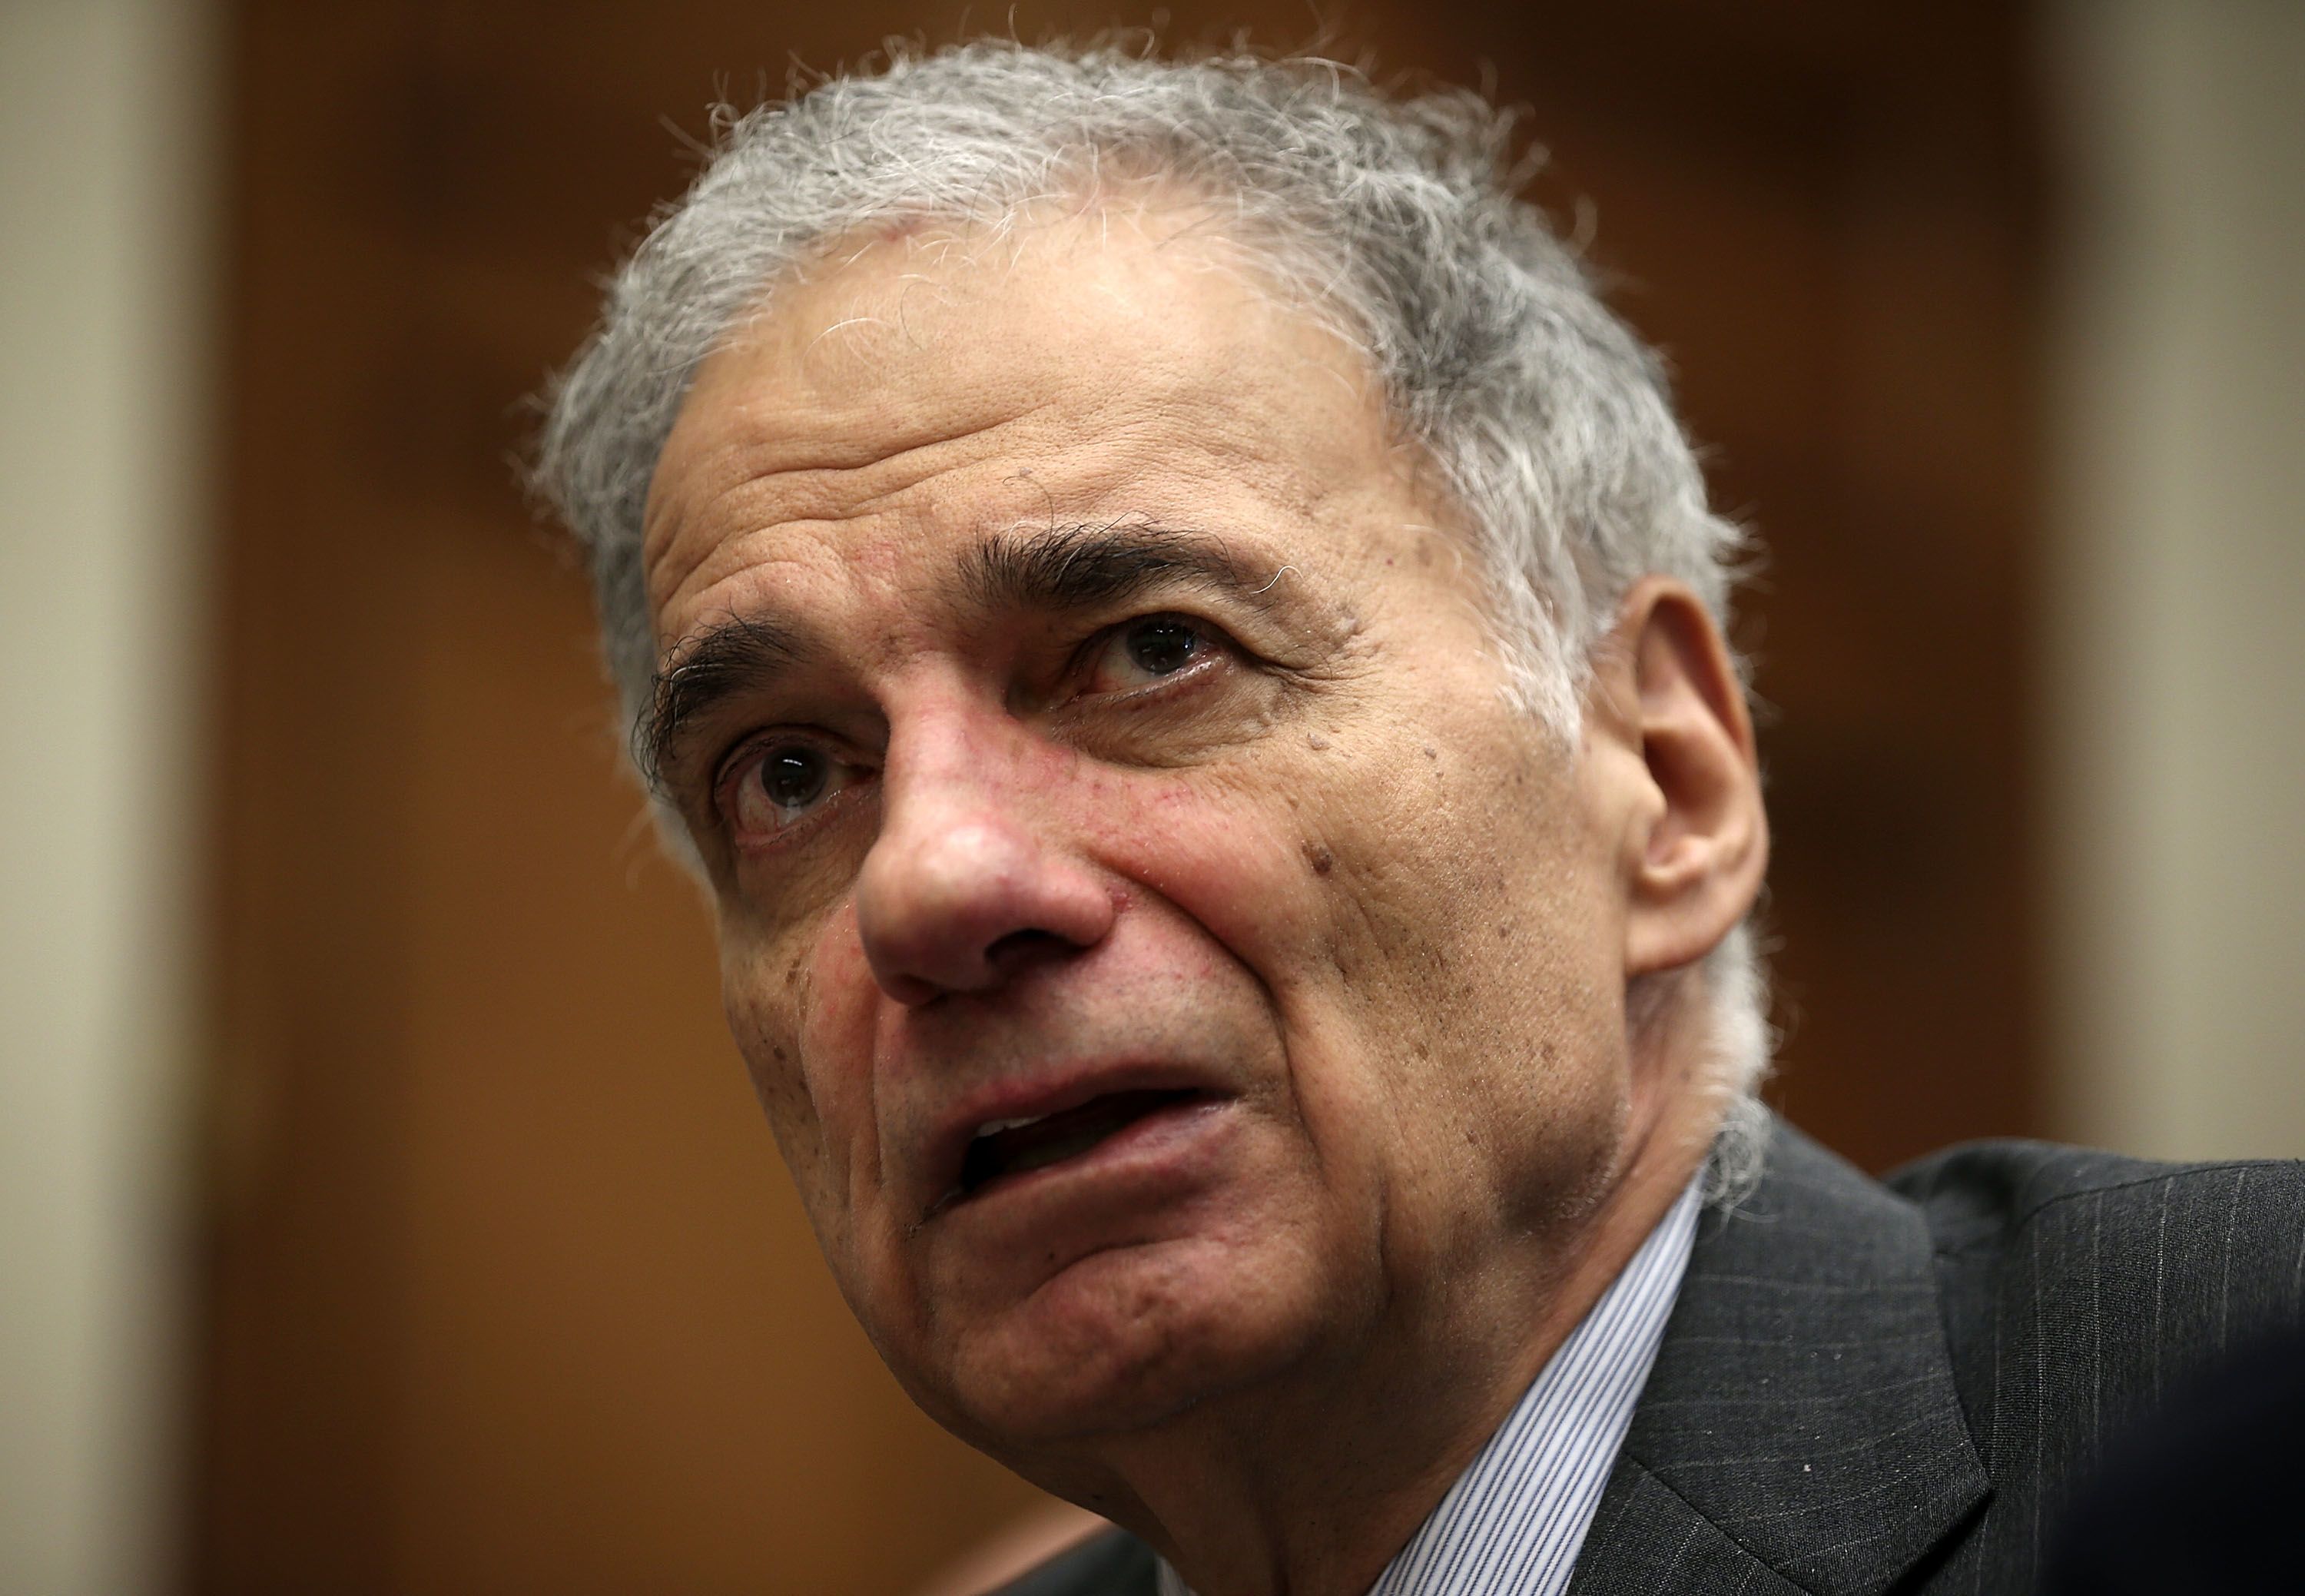 Ralph Nader, on 737 Max crashes, says FAA beholden to Boeing